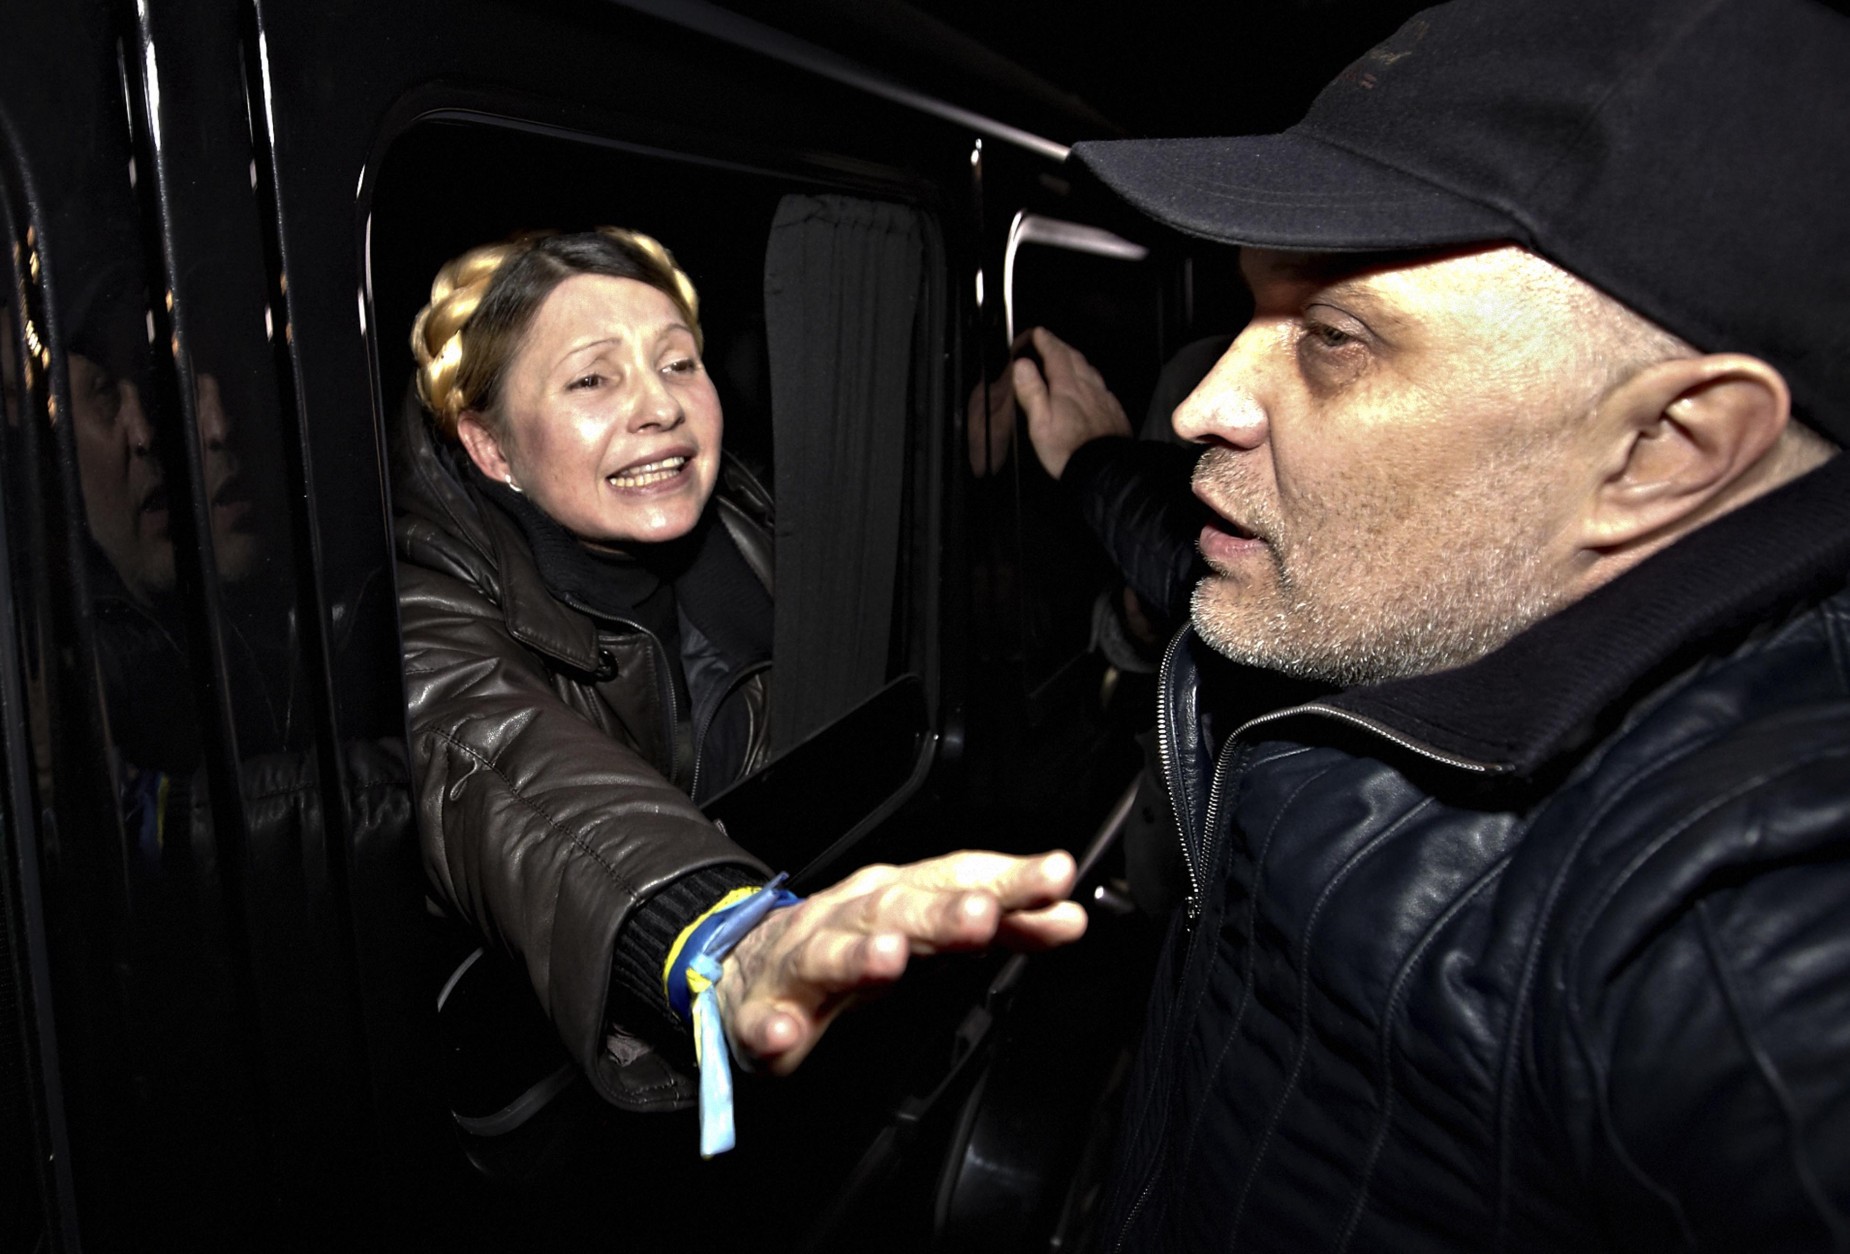 FOR USE AS DESIRED, YEAR END PHOTOS - FILE - Former Ukrainian Prime Minister Yulia Tymoshenko is greeted by supporters shortly after being freed from prison in Kharkiv, Ukraine, Saturday, Feb. 22, 2014. (AP Photo/Sergey Kozlov, File)